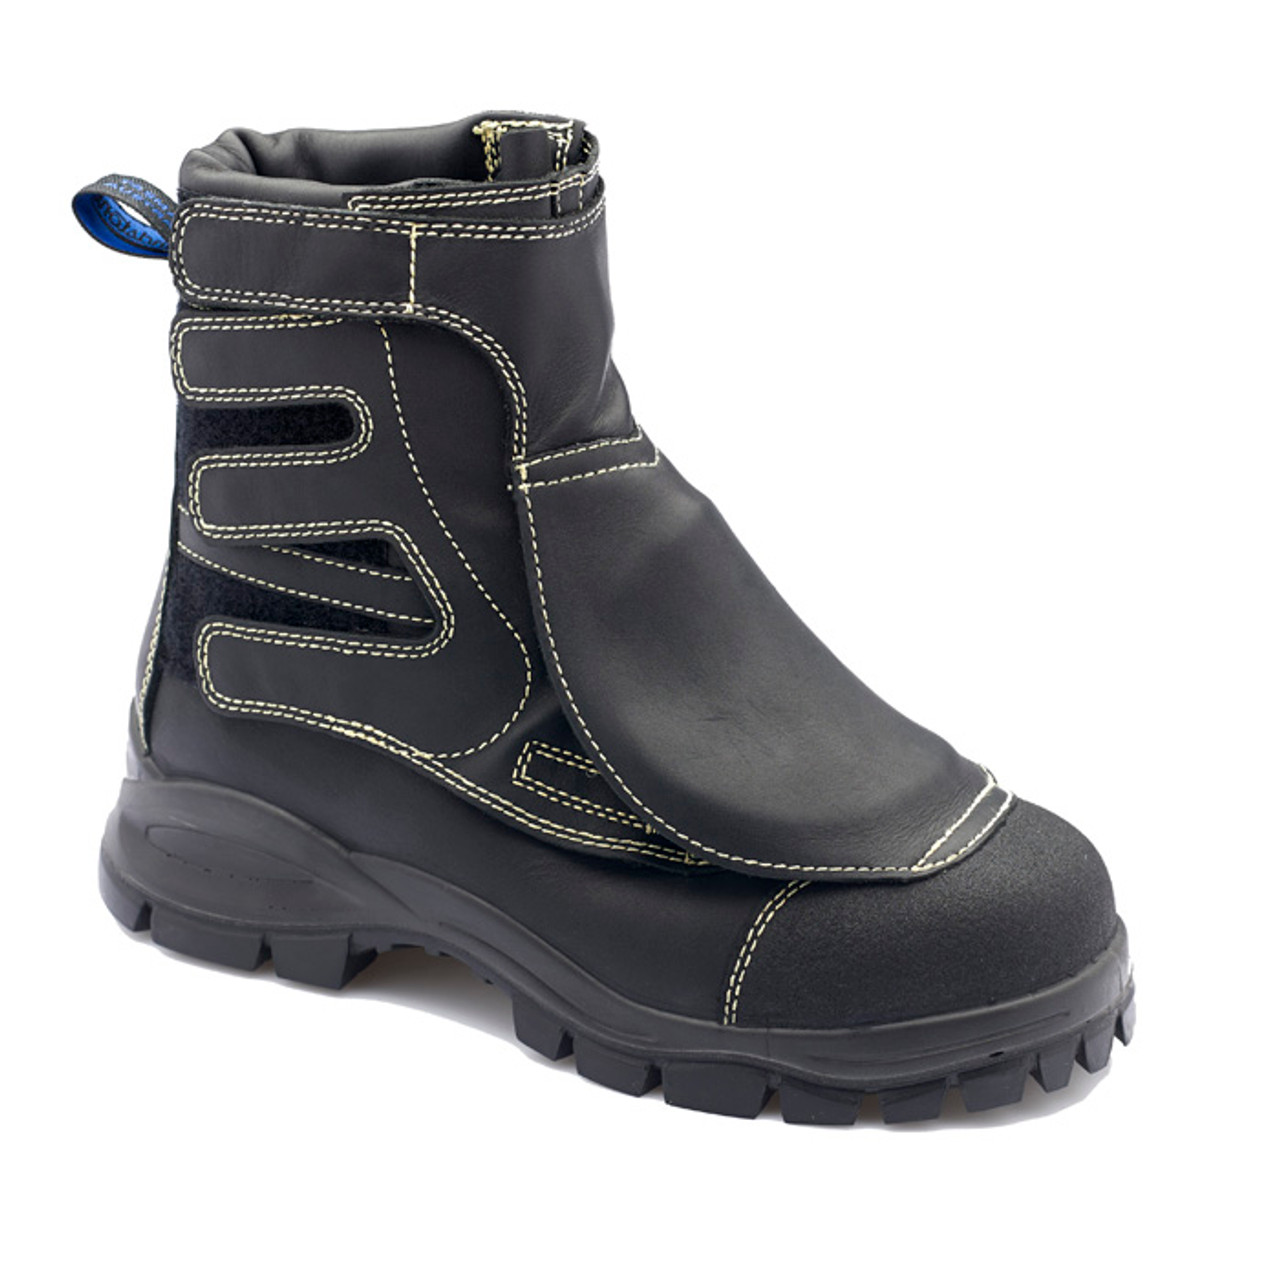 blundstone mining boots